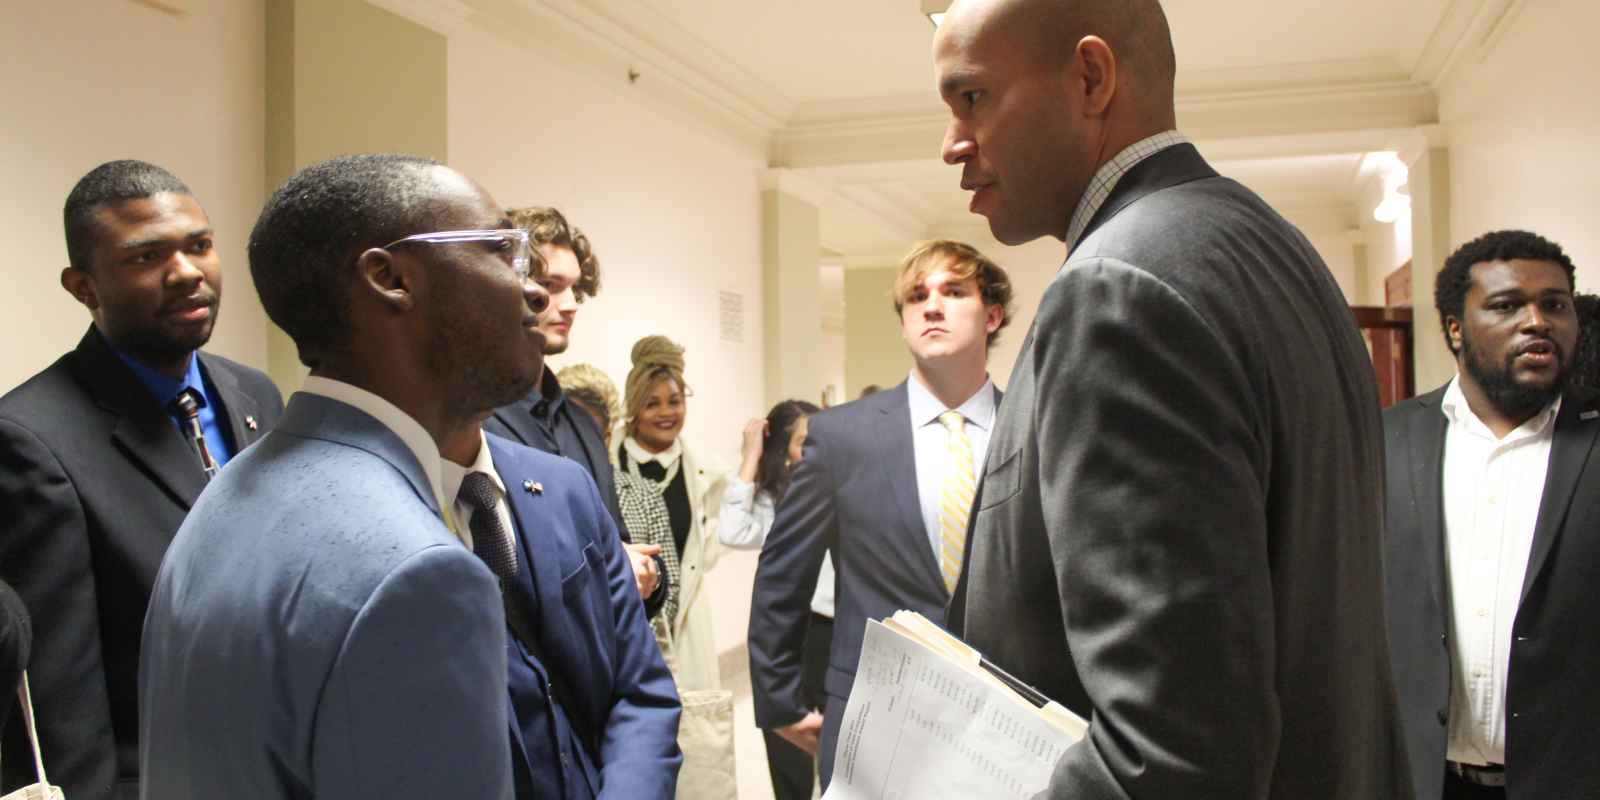 College students speaking with a Georgia legislator on student lobby day 2023